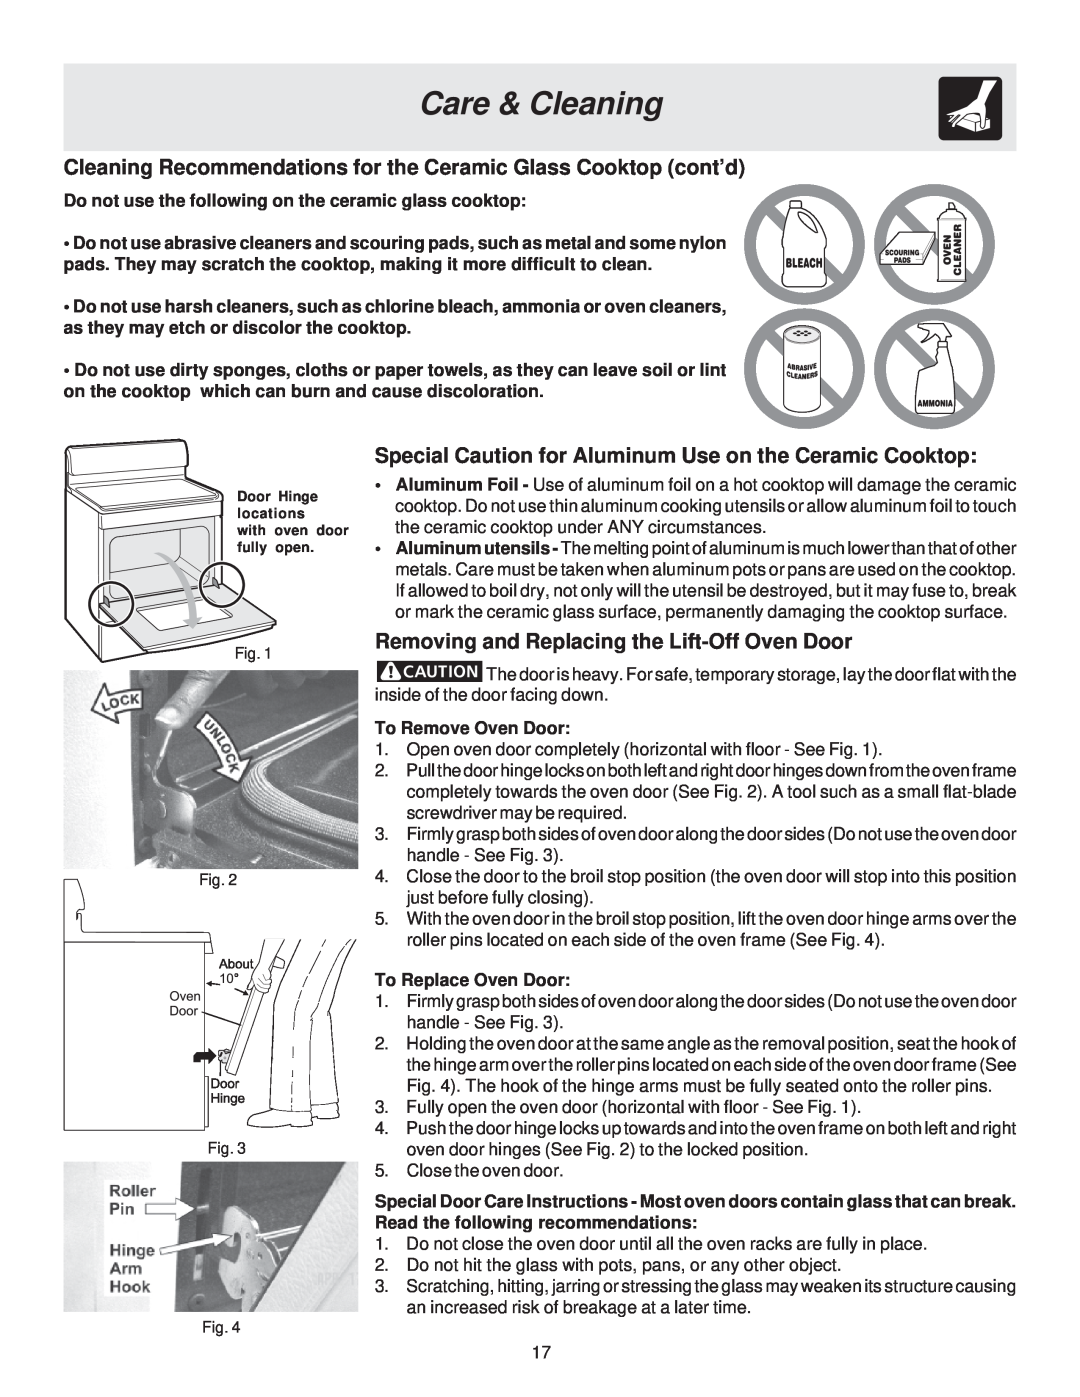 White-Westinghouse ES200 Cleaning Recommendations for the Ceramic Glass Cooktop cont’d, To Remove Oven Door 